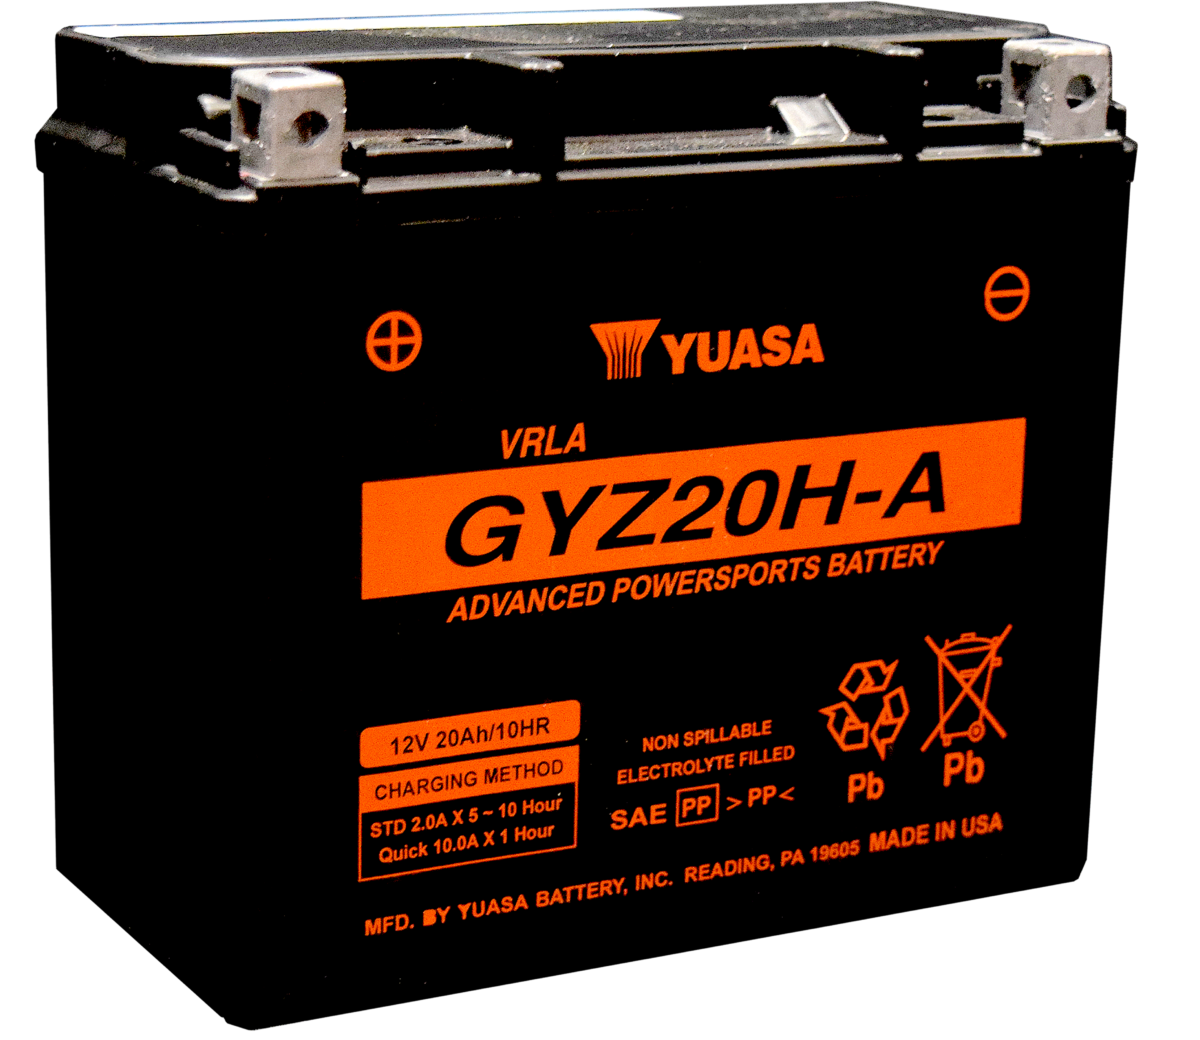 Yuasa GYZ20H-A AGM Battery for motorsports, powersports, and motorcycle